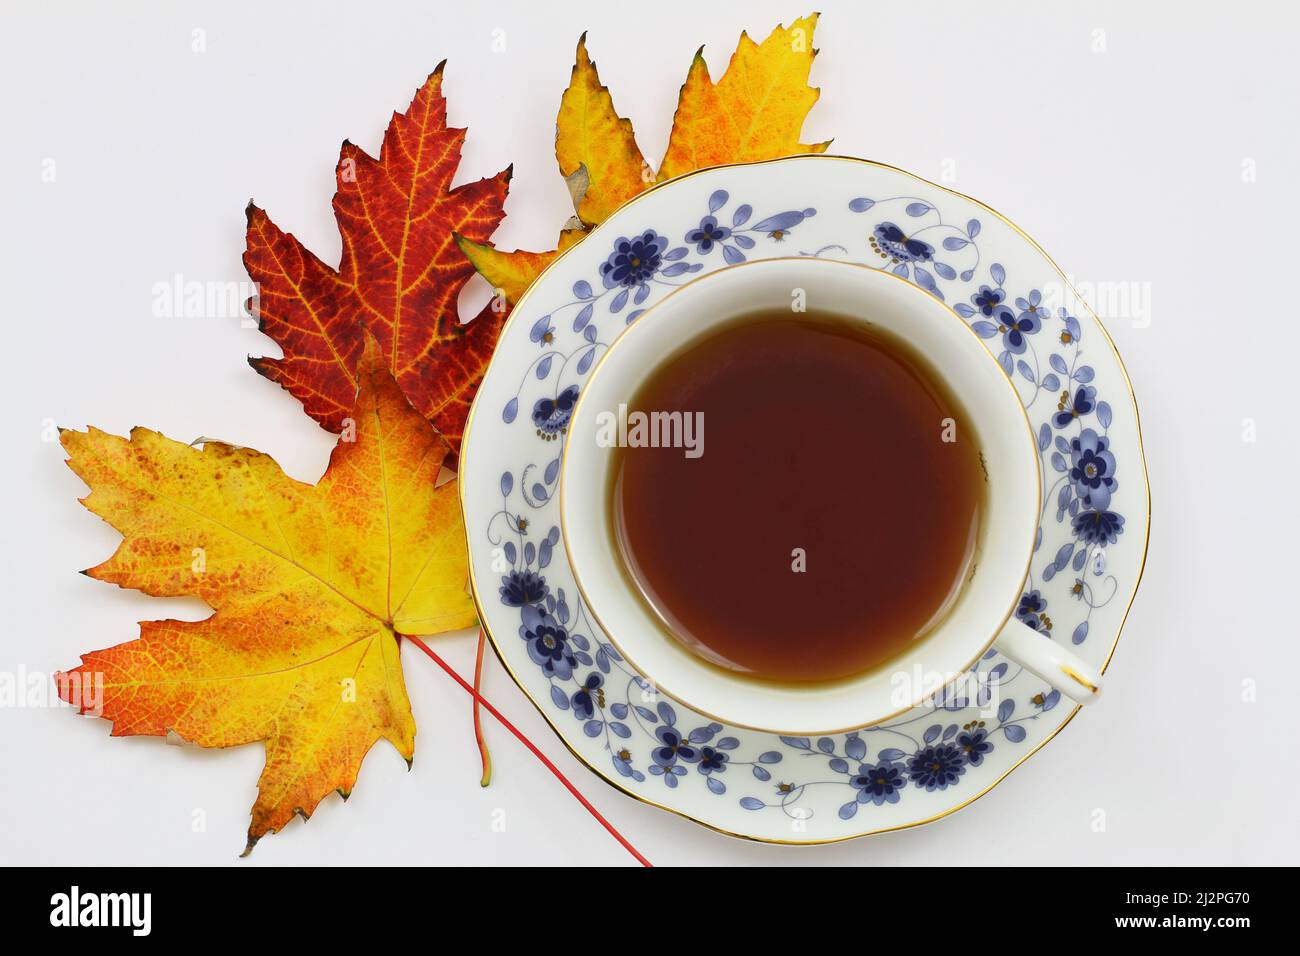 Black tea in vintage cup on top of colorful autumn maple leaves on white background Stock Photo